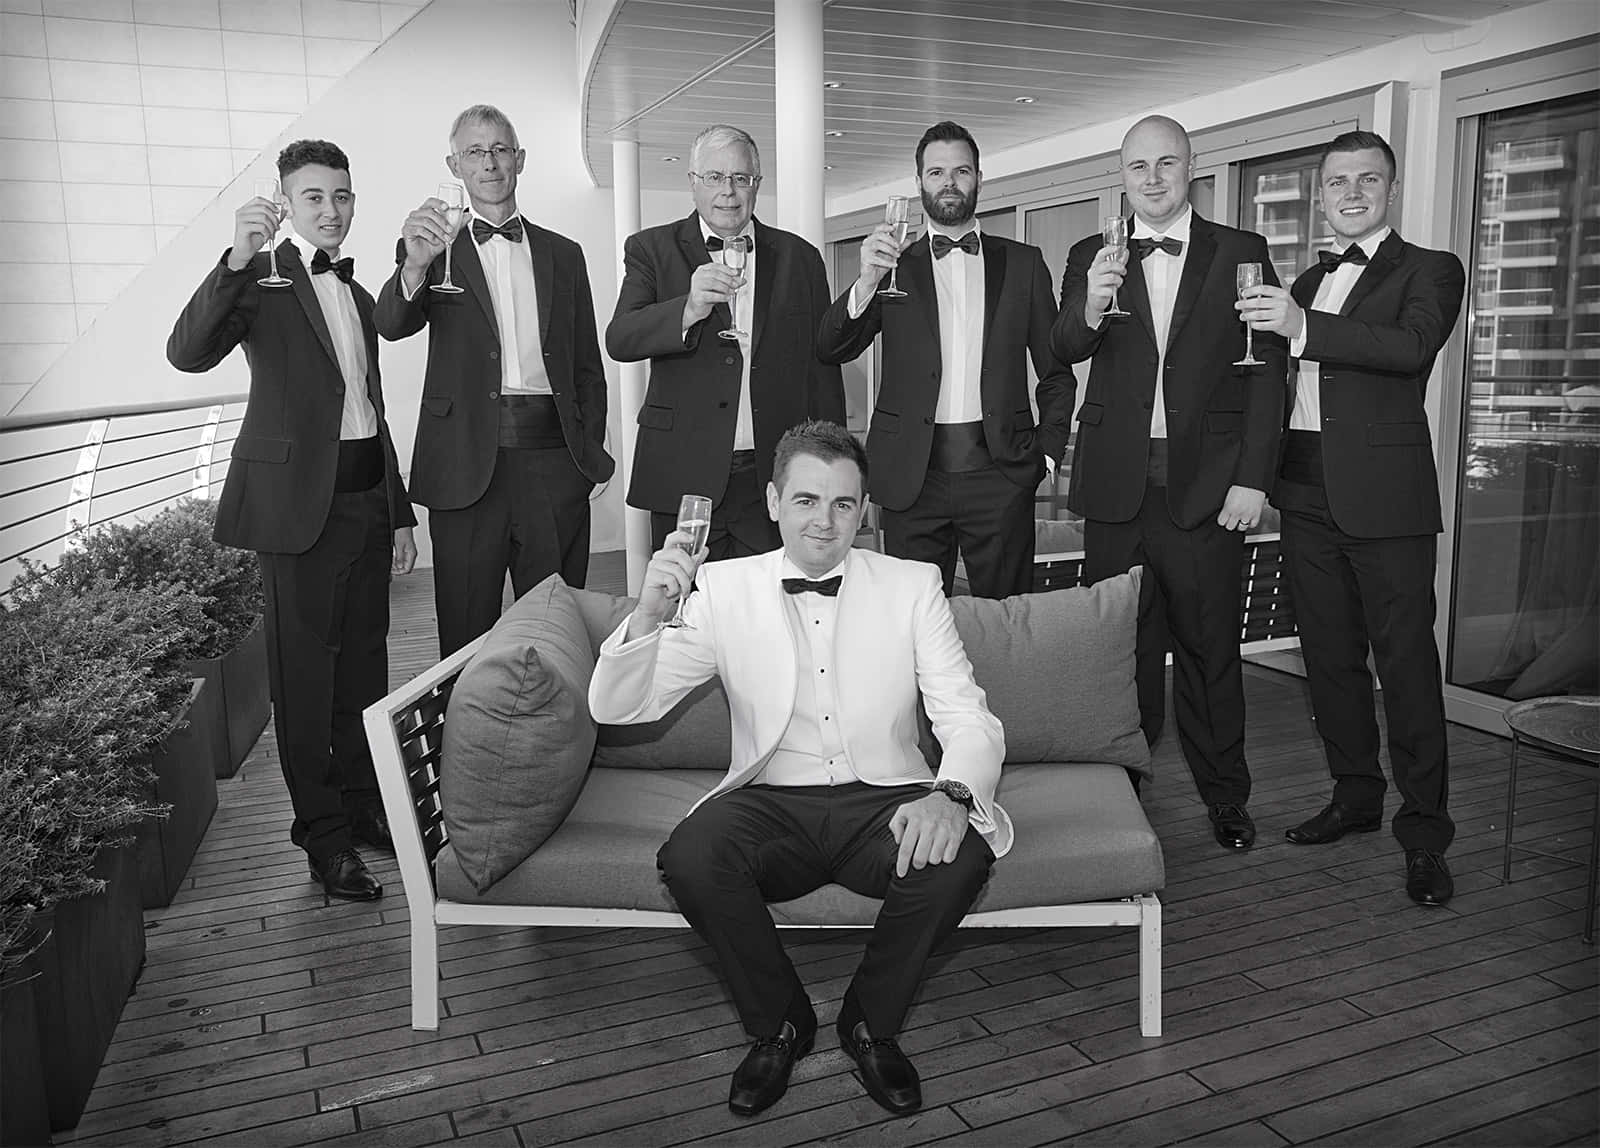 Groomsmen Celebrate Together on the Big Day